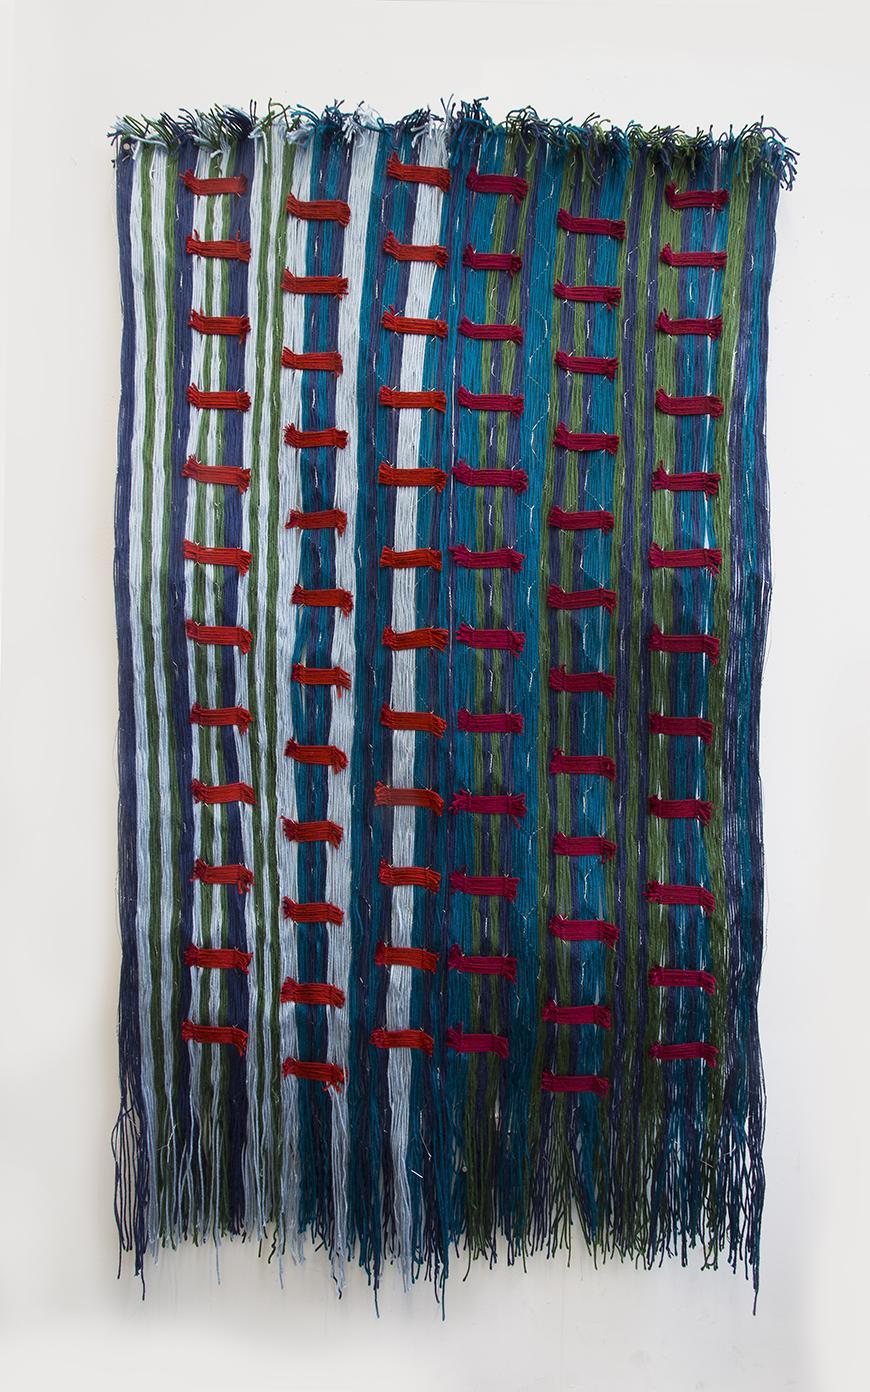 Photo of a fiber sculpture: Strands of light blue, navy blue, teal, and olive green yarn are woven together in a vertical stripe pattern, with irregular stripe widths. Many segmented maroon colored horizontal stripes interrupt the vertical stripe pattern in regular distances. 